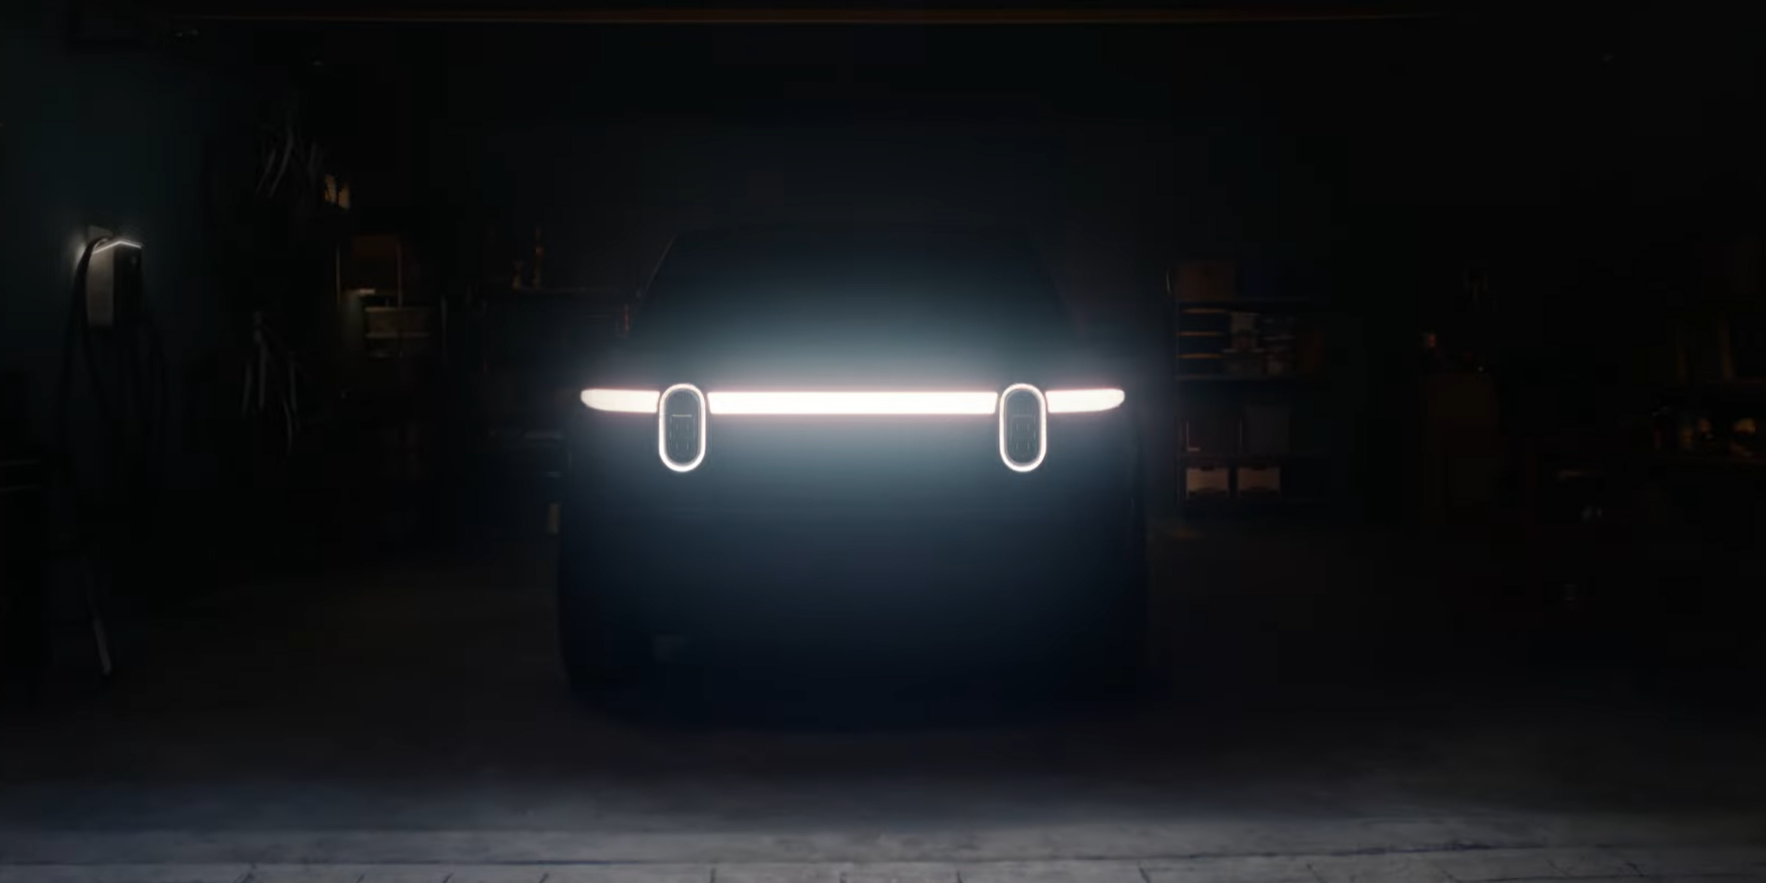 The Rivian R2 Looks Like a Rivian R1 in a New Teaser